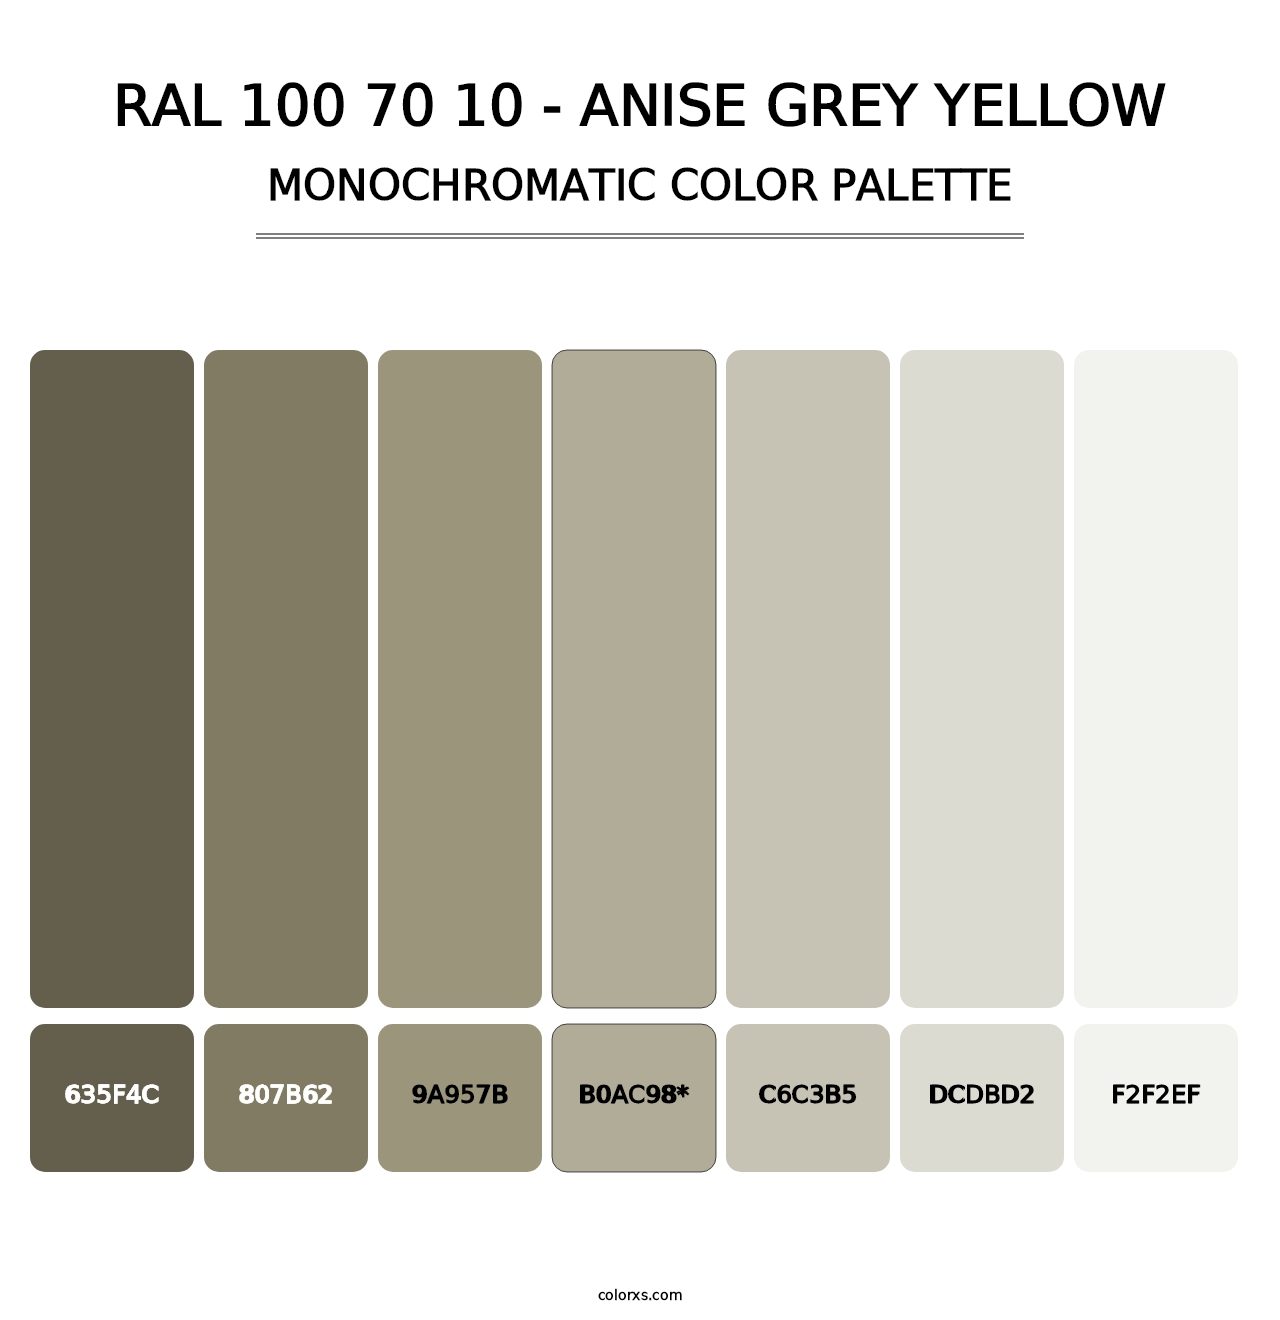 RAL 100 70 10 - Anise Grey Yellow - Monochromatic Color Palette